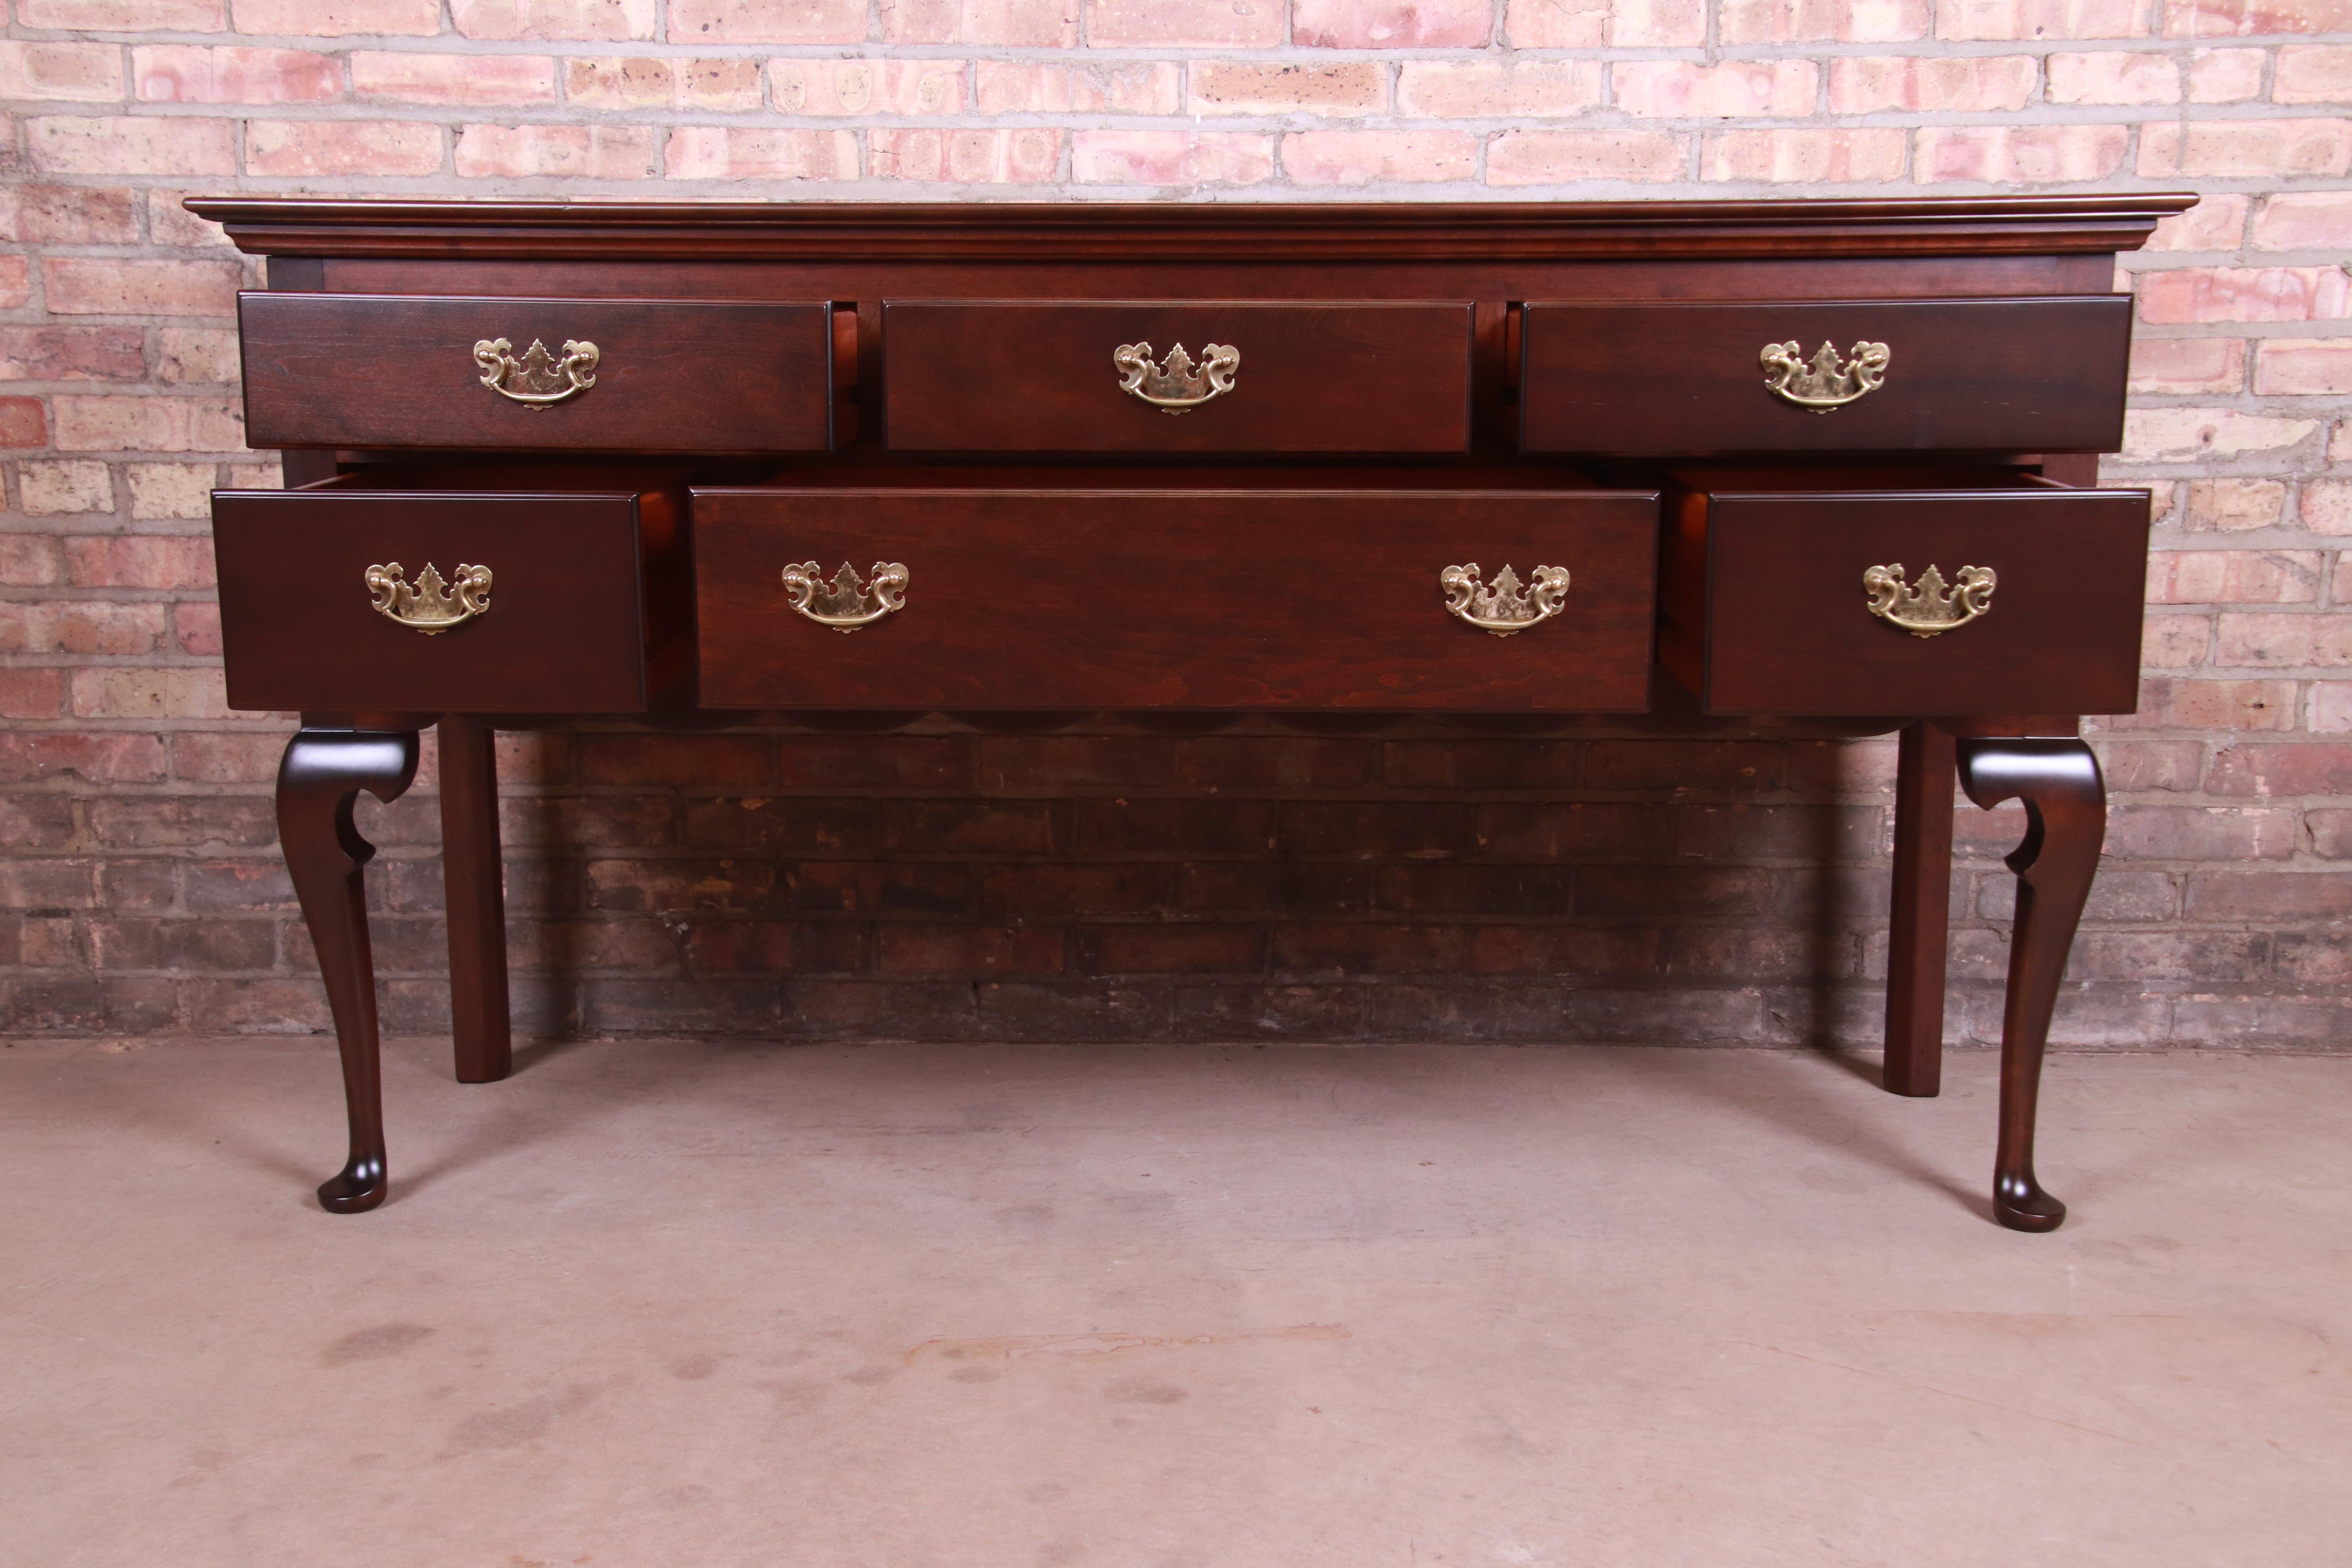 20th Century Stickley Queen Anne Solid Cherry Wood Sideboard Credenza, Newly Refinished For Sale